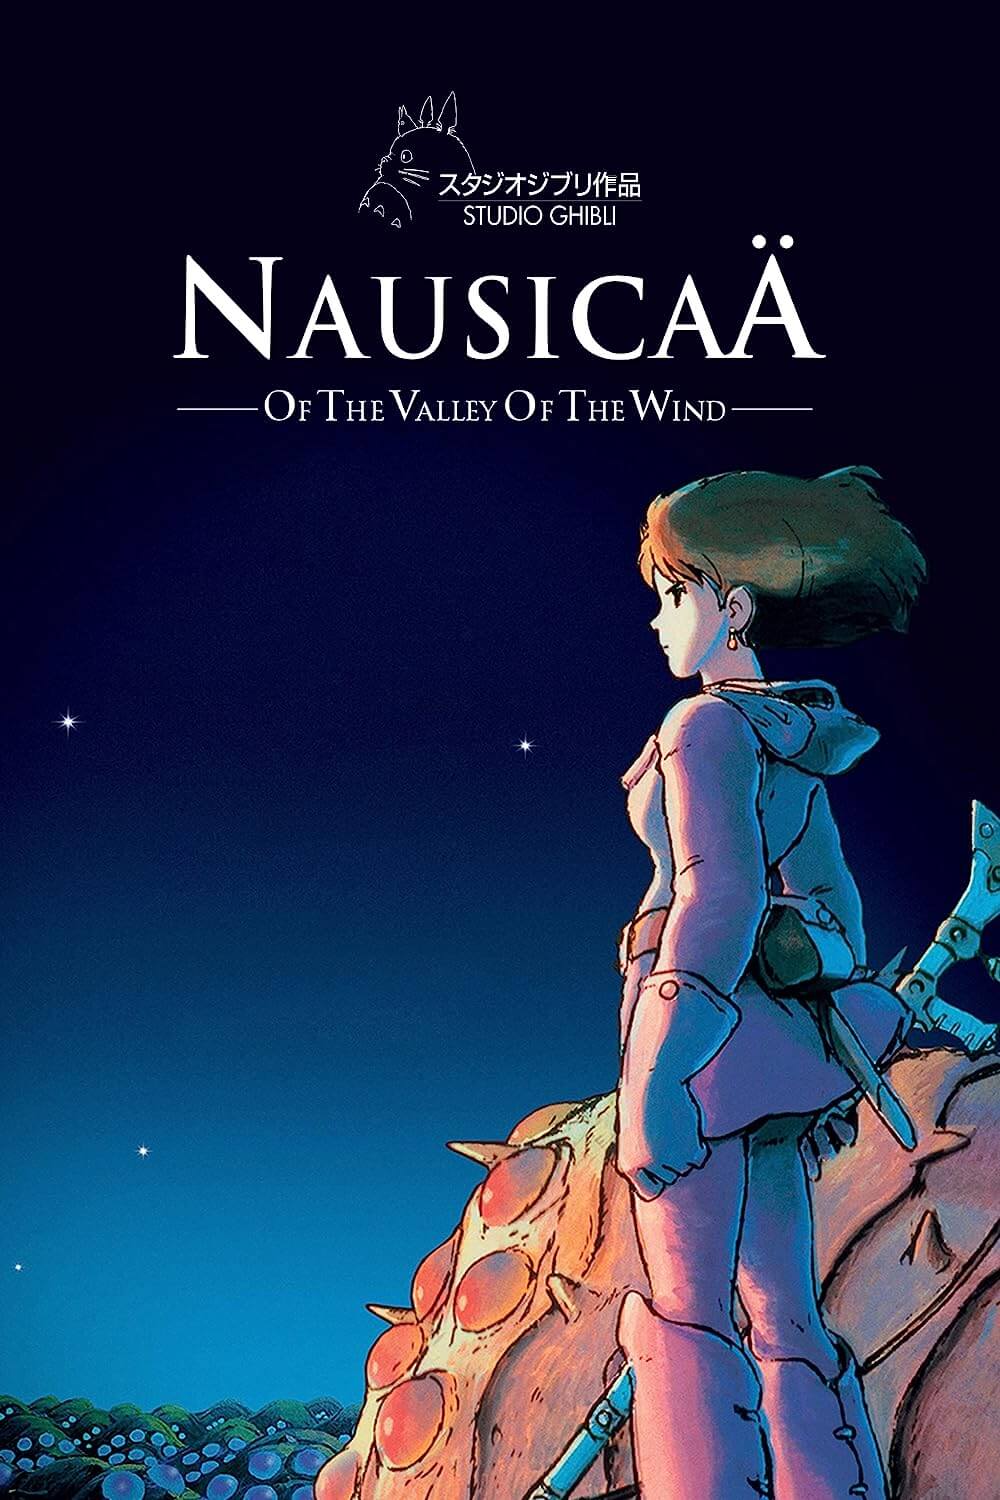 Watch Nausicaä of the Valley of the Wind, it's one of the best Studio Ghibli movies. Recommended for 11+ year olds.